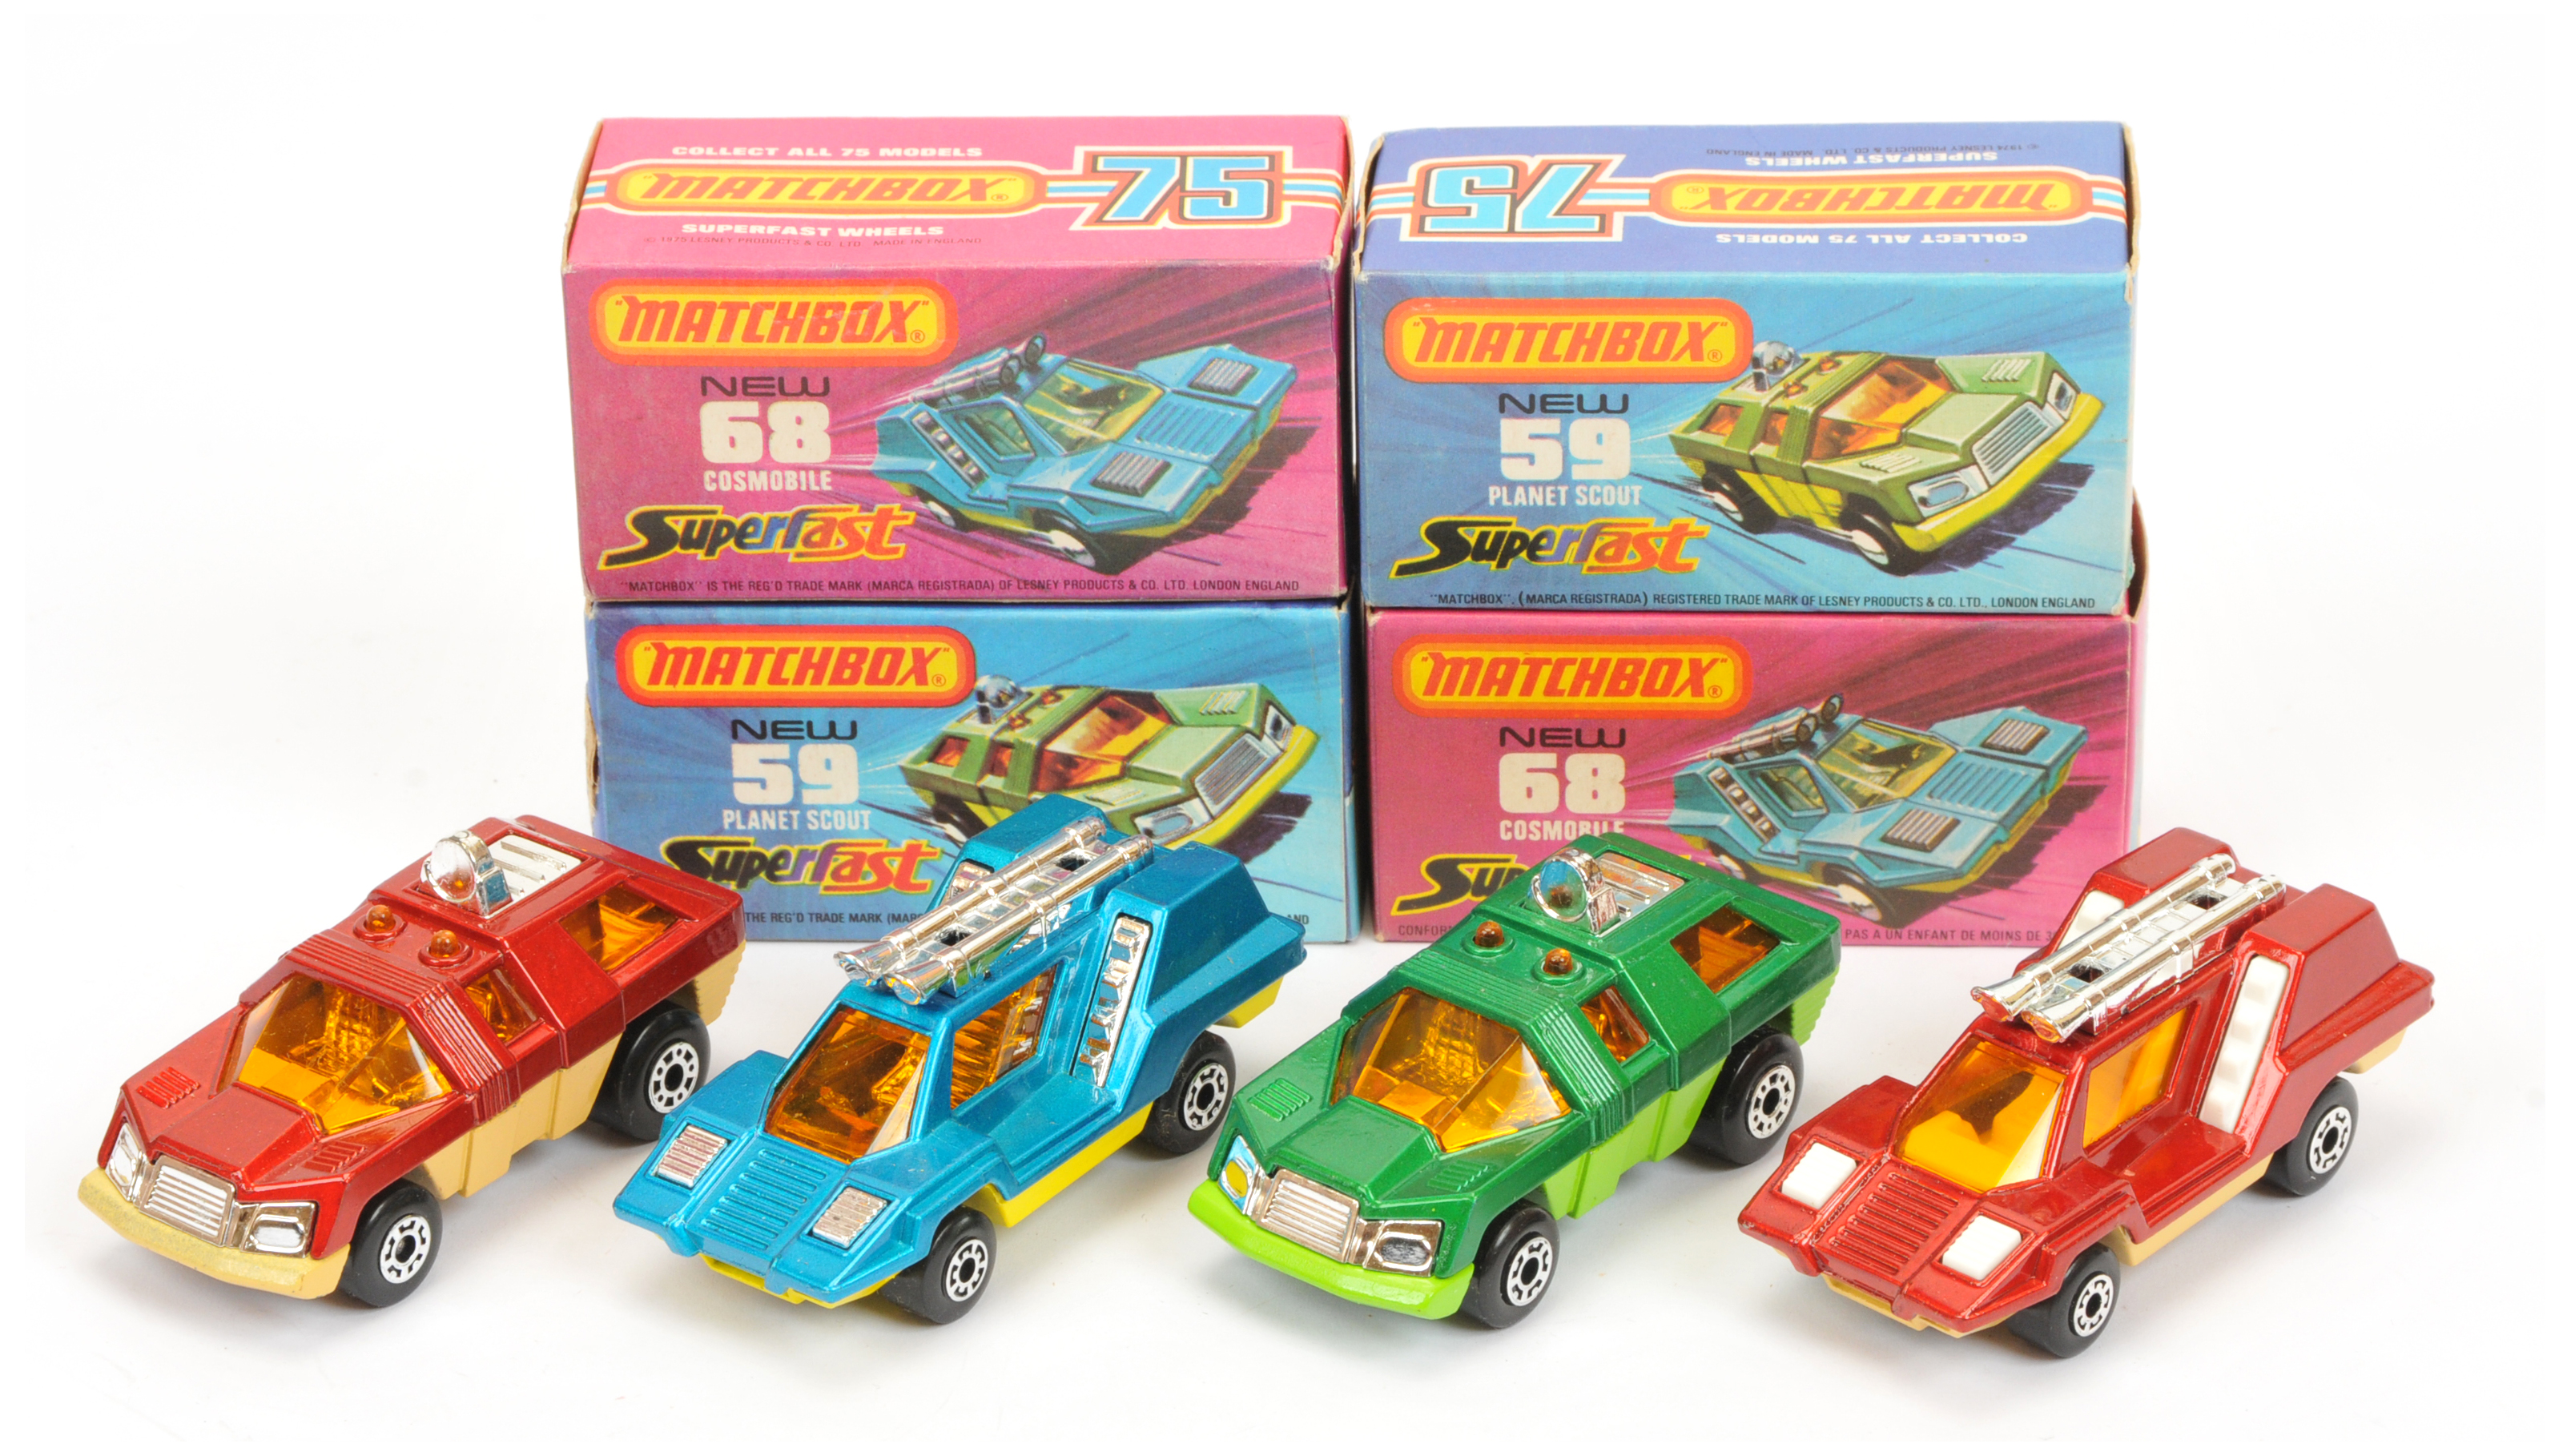 Matchbox Superfast Group Of 4 To Include (1) 59 Planet Scout - Two-Tone Green, (2) Same but Metal...